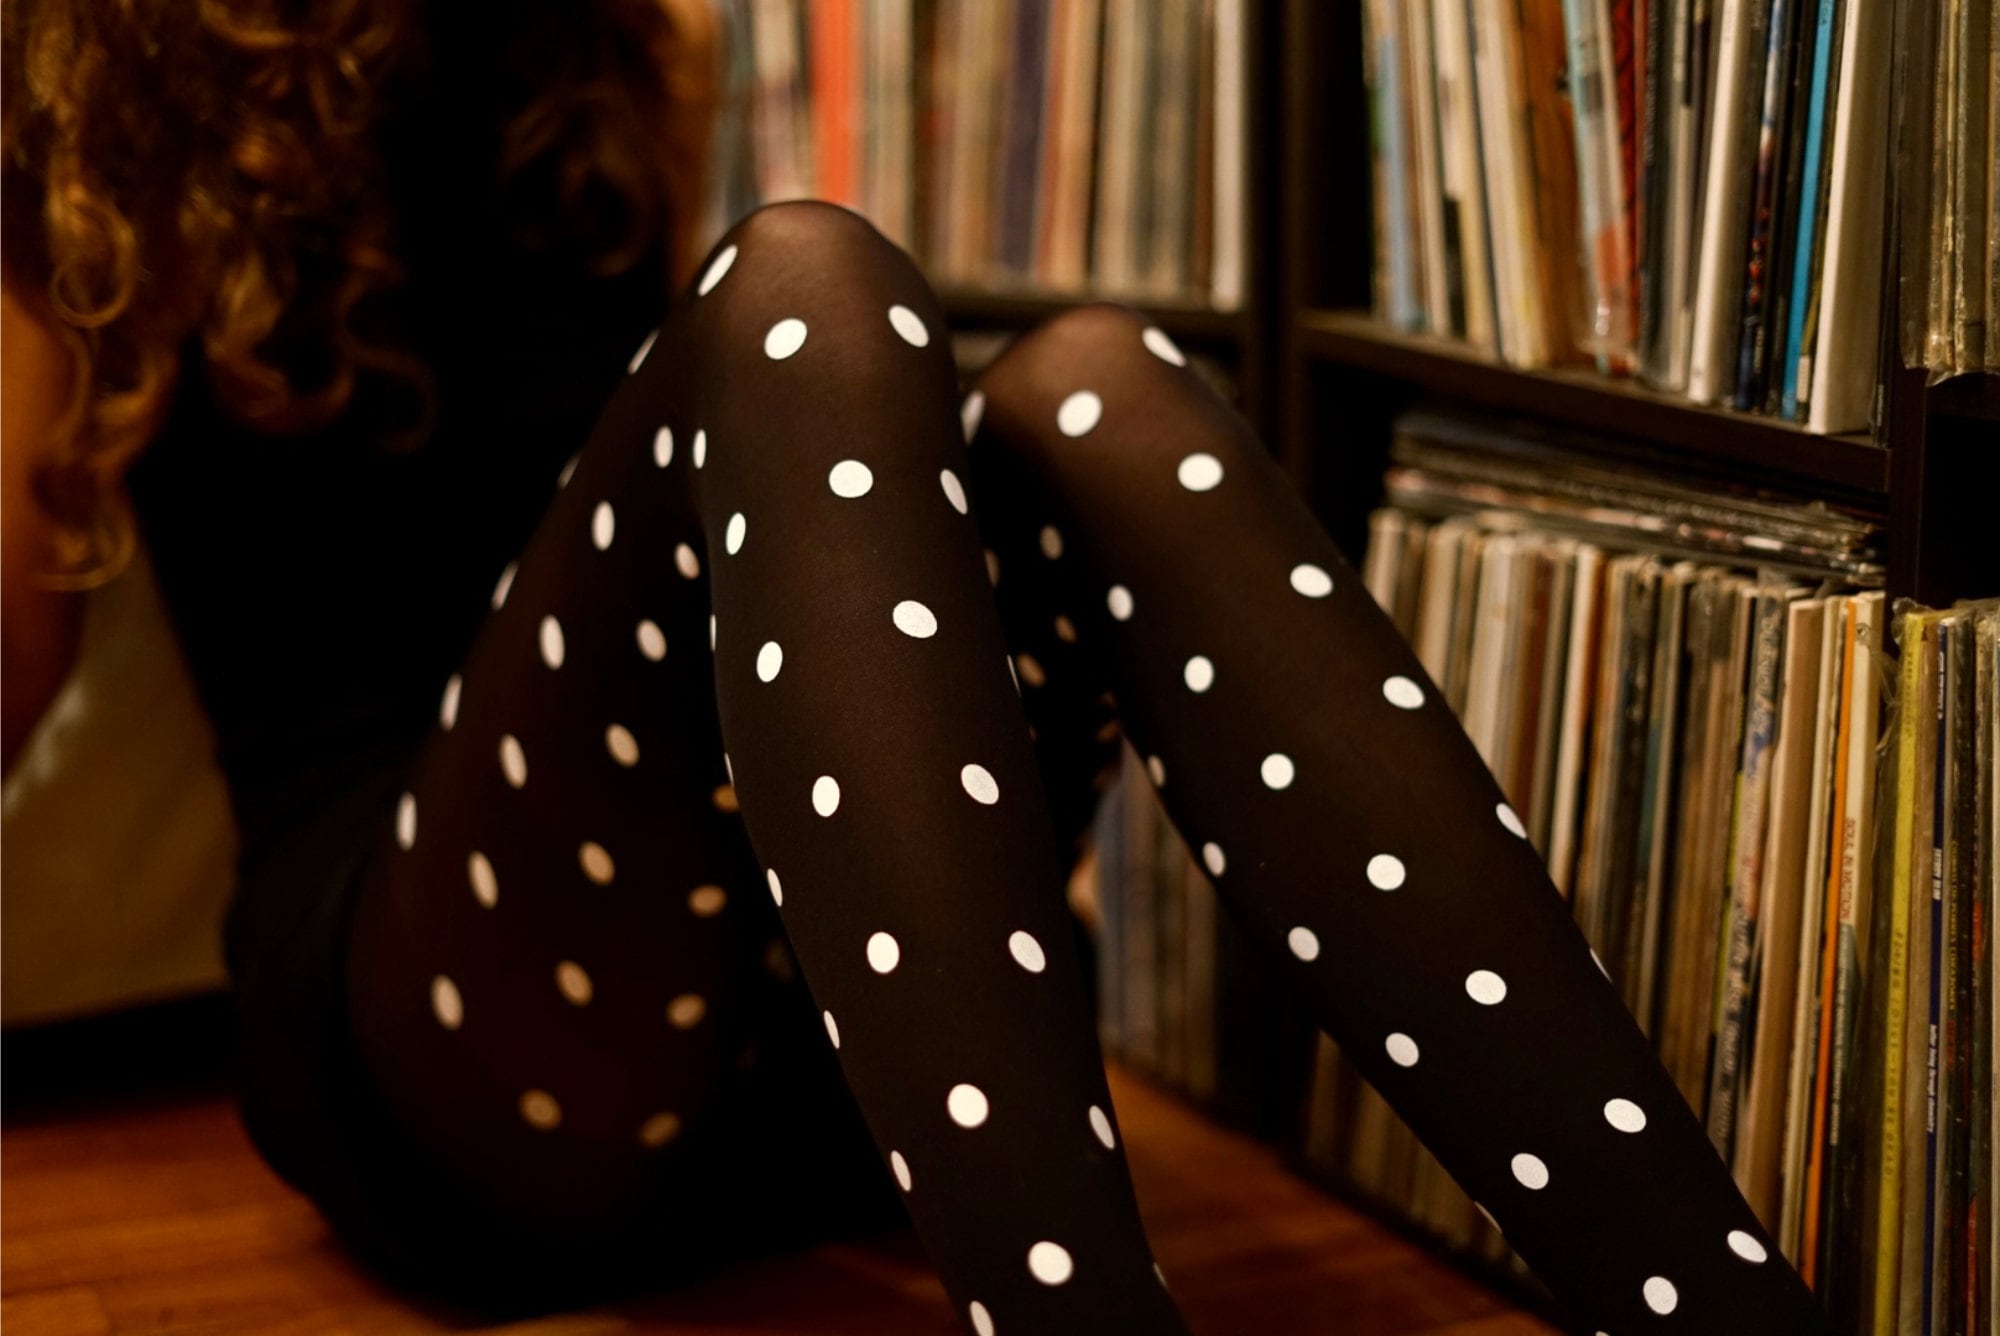 Black Polka Dot Patterned Tights, Women's Black Tights With White